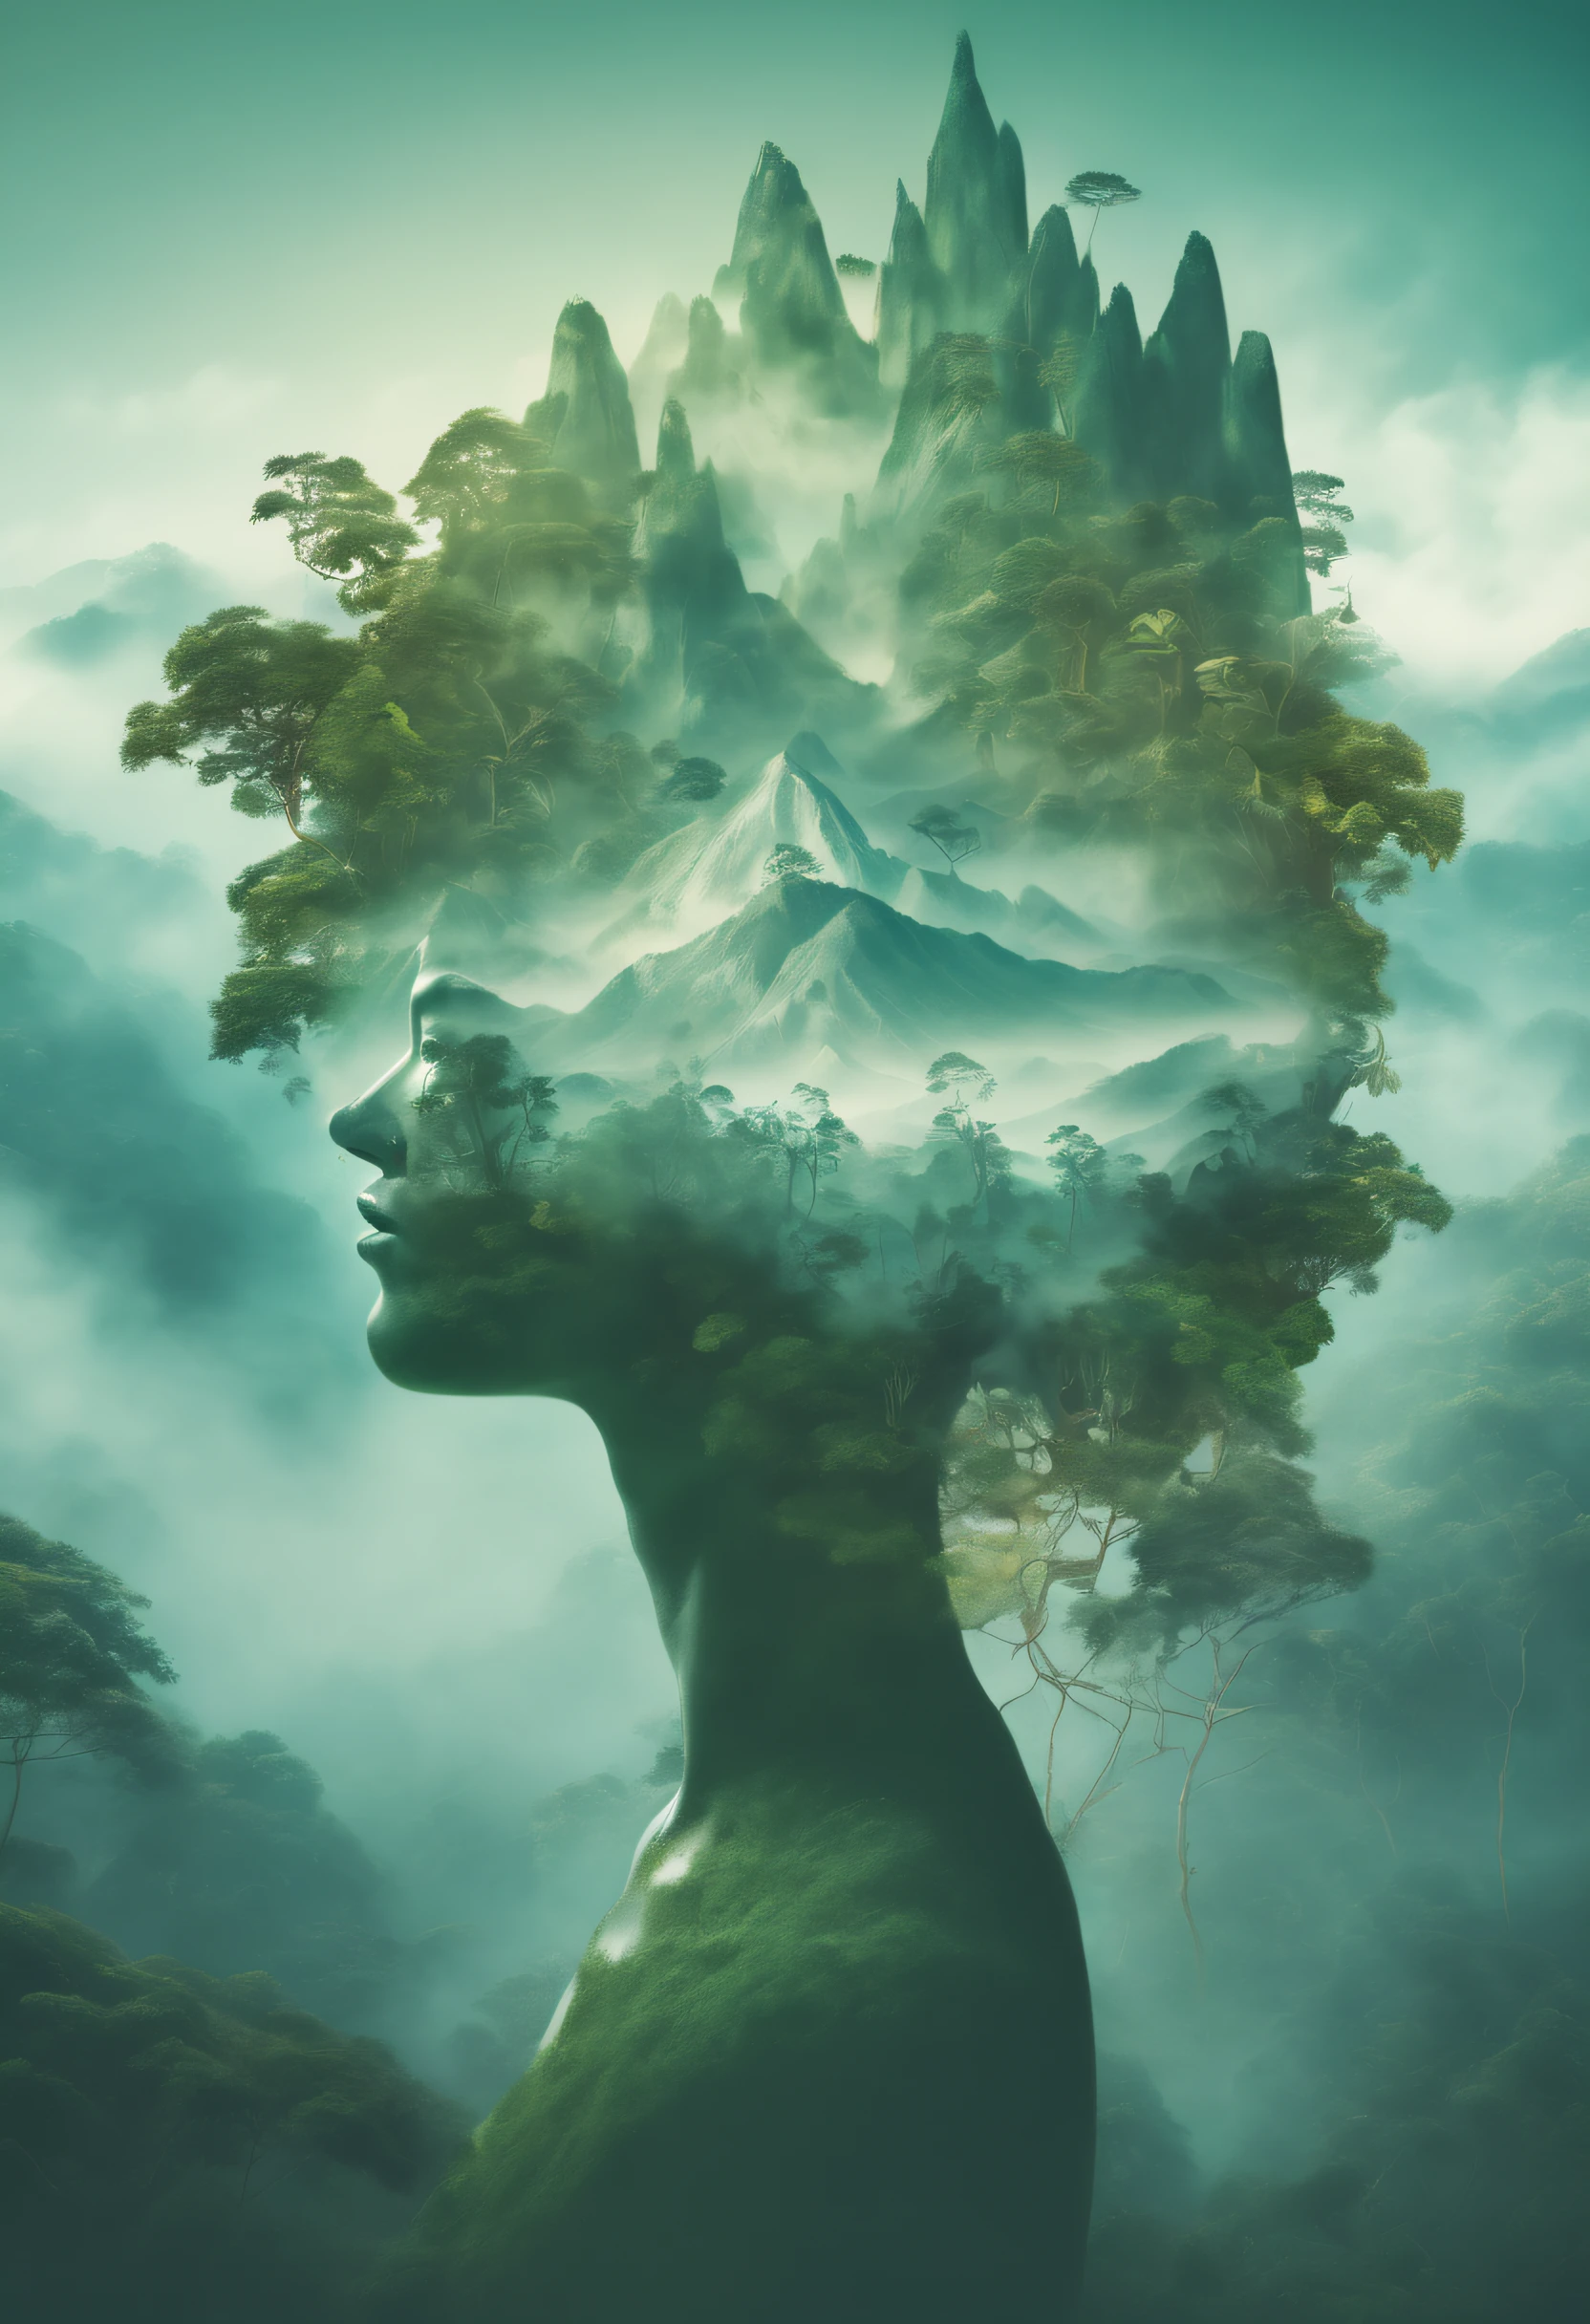 Dubrec style，Transparent person avatar，Jungle mountains image foreground，（multiple exposure：1.8），Complex illustrations in surrealist art style，Surreal dreams